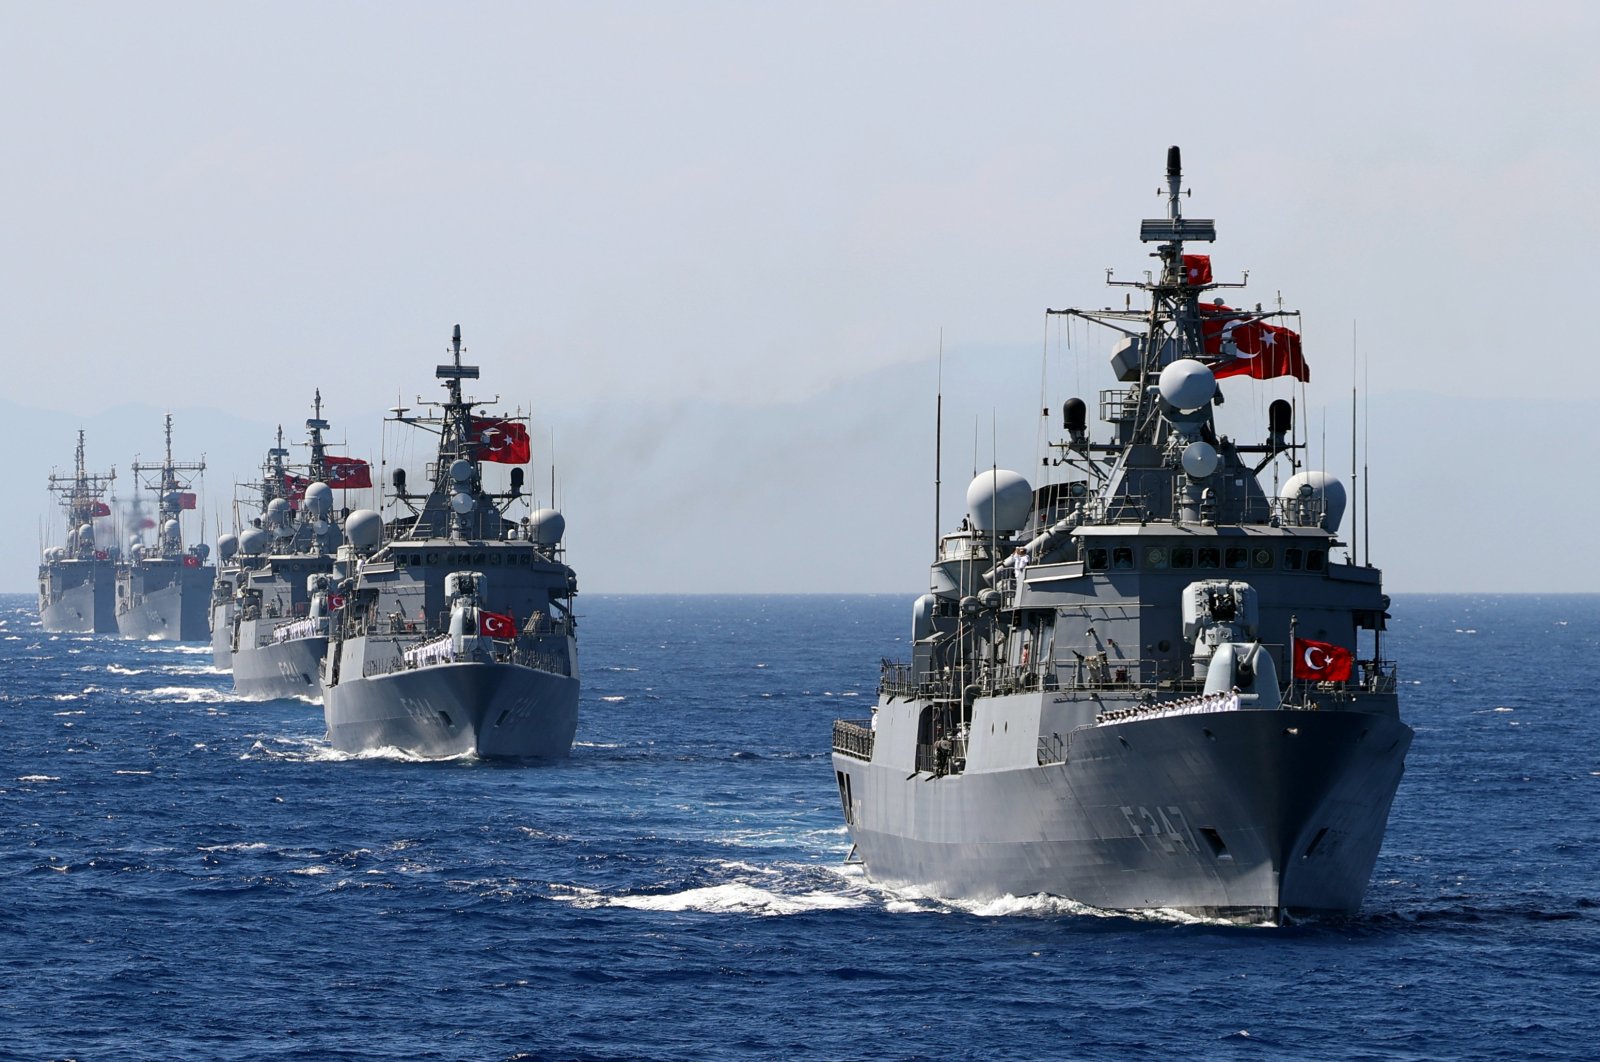 A general view of a military drill conducted by the Turkish Naval Forces in the Mediterranean Sea, June 7, 2021. (AA Photo)